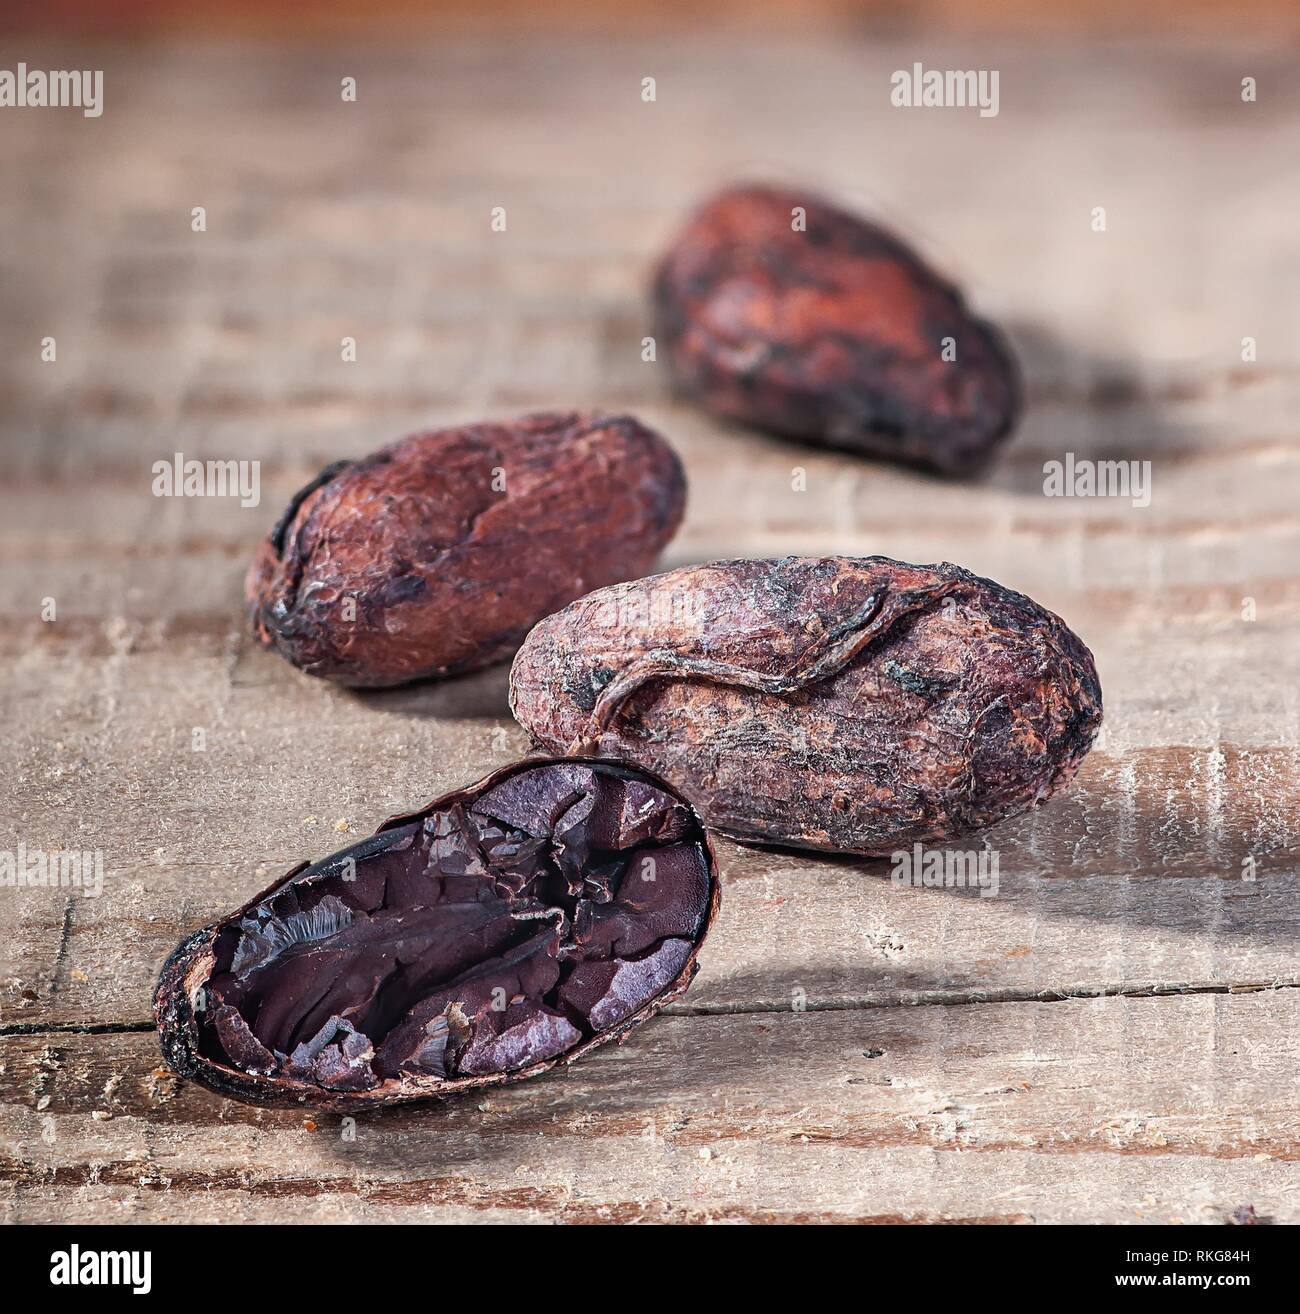 Cocoa beans in a row with a blurry background. Cocoa beans on a rustic wooden table. Chopped cacao bean. Stock Photo